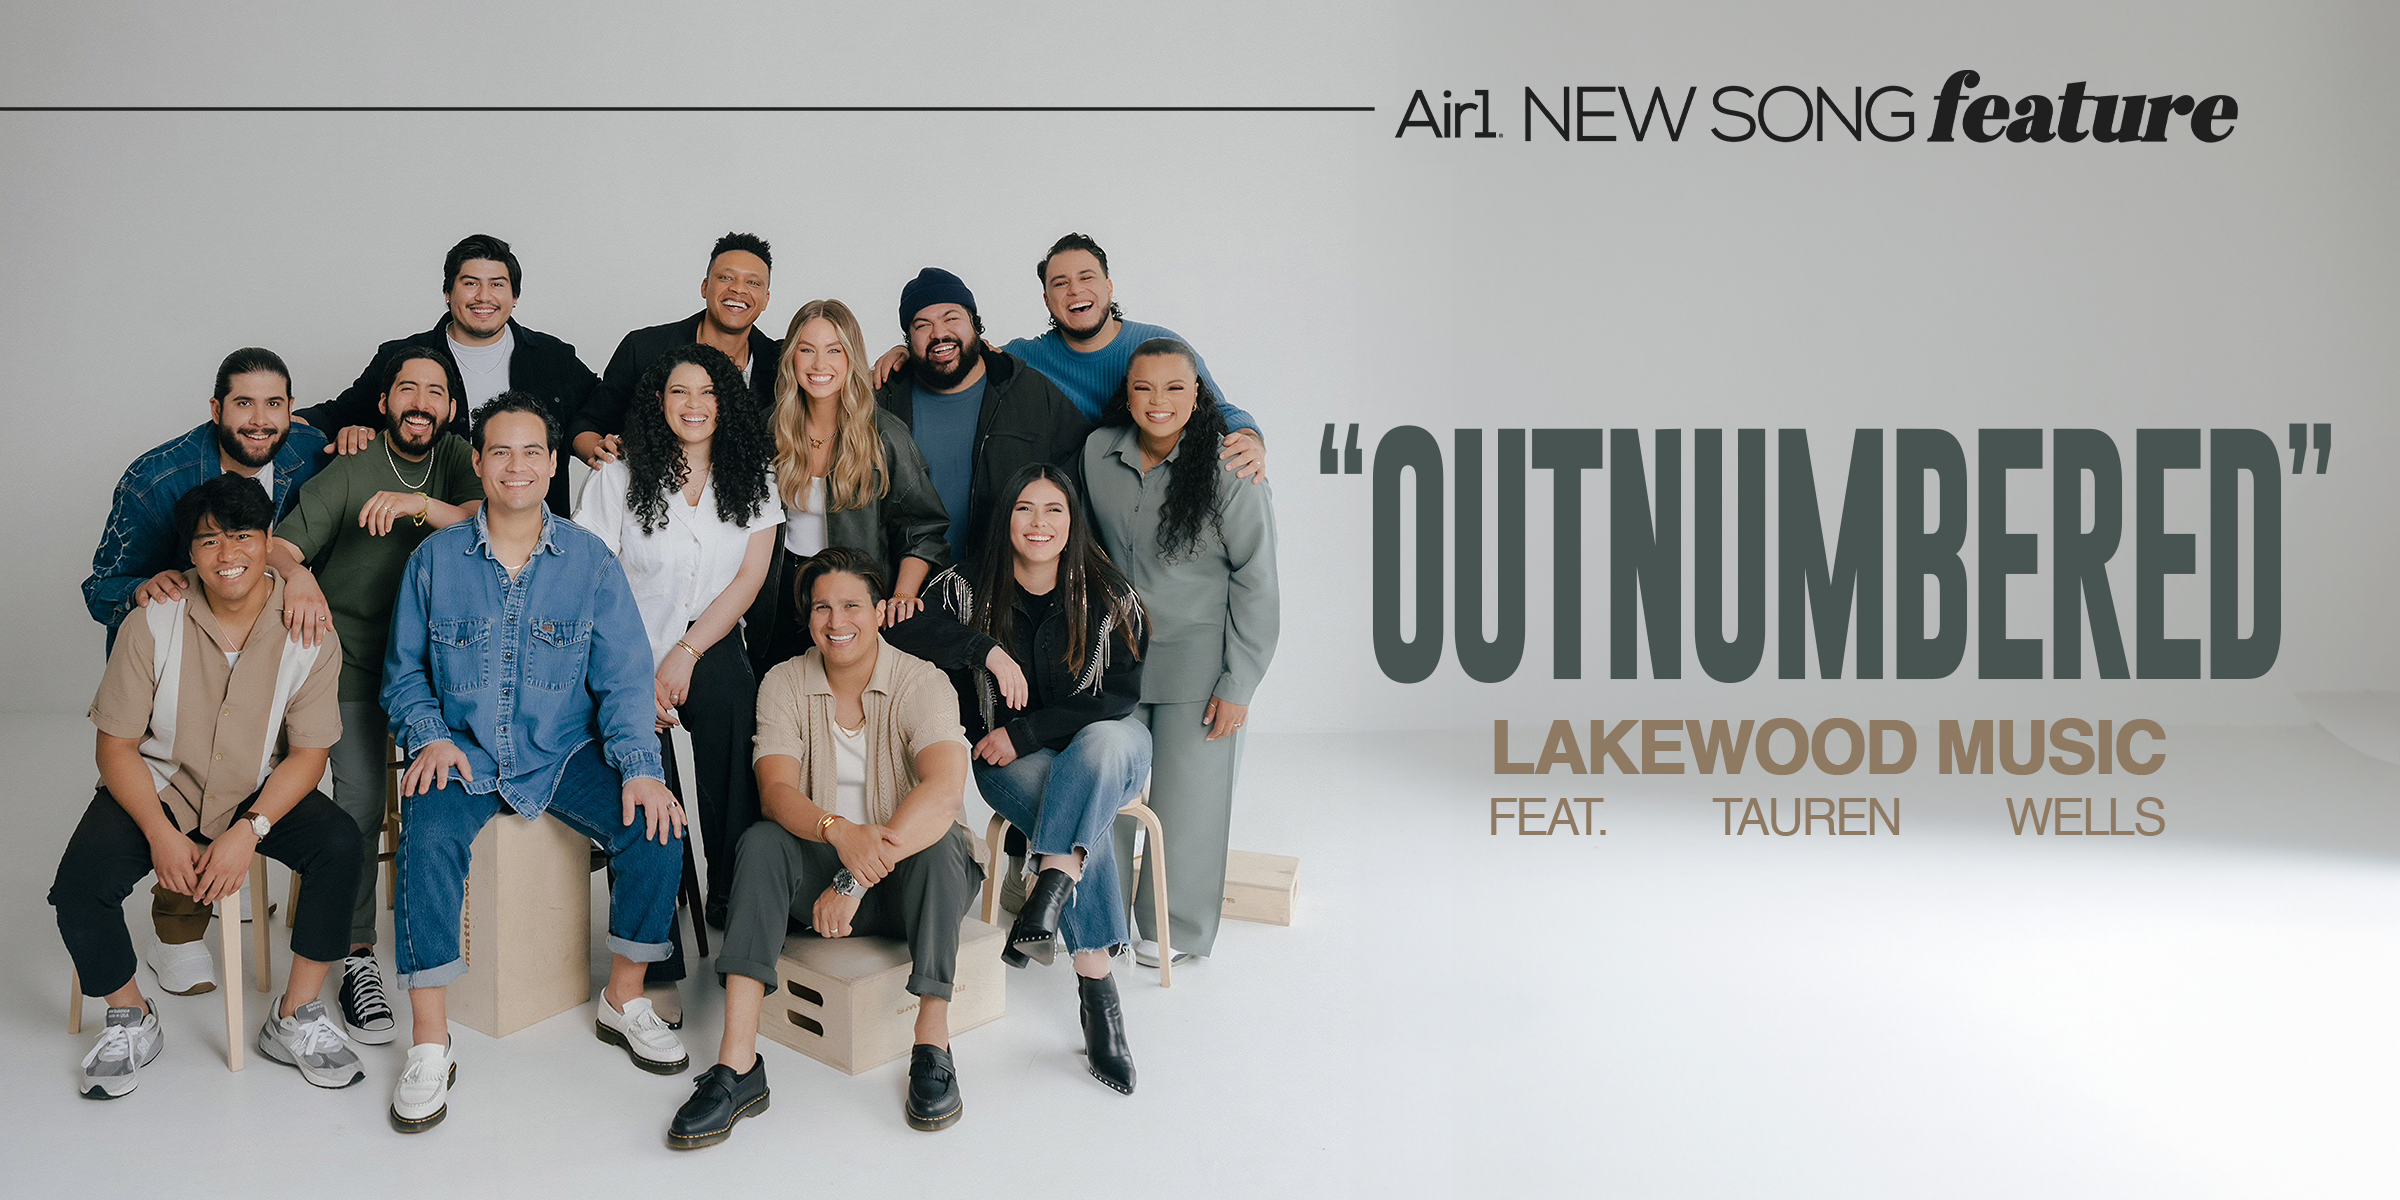 New Song Feature: "Outnumbered" Lakewood Music Feat. Tauren Wells